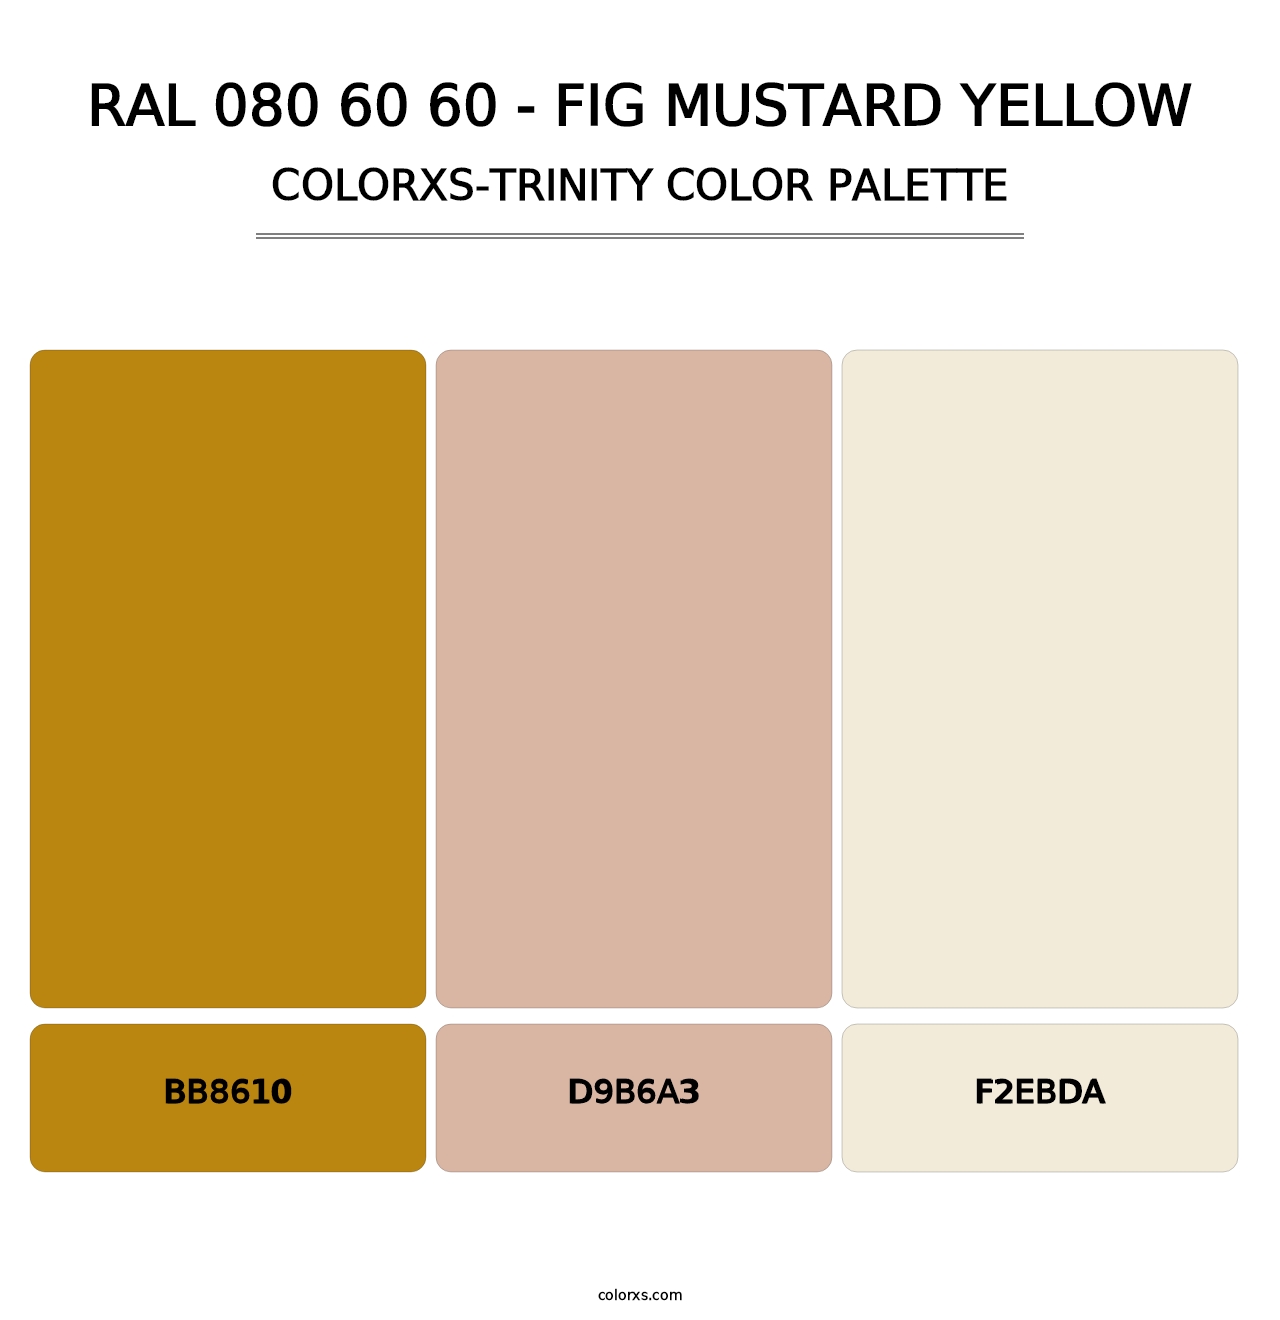 RAL 080 60 60 - Fig Mustard Yellow - Colorxs Trinity Palette